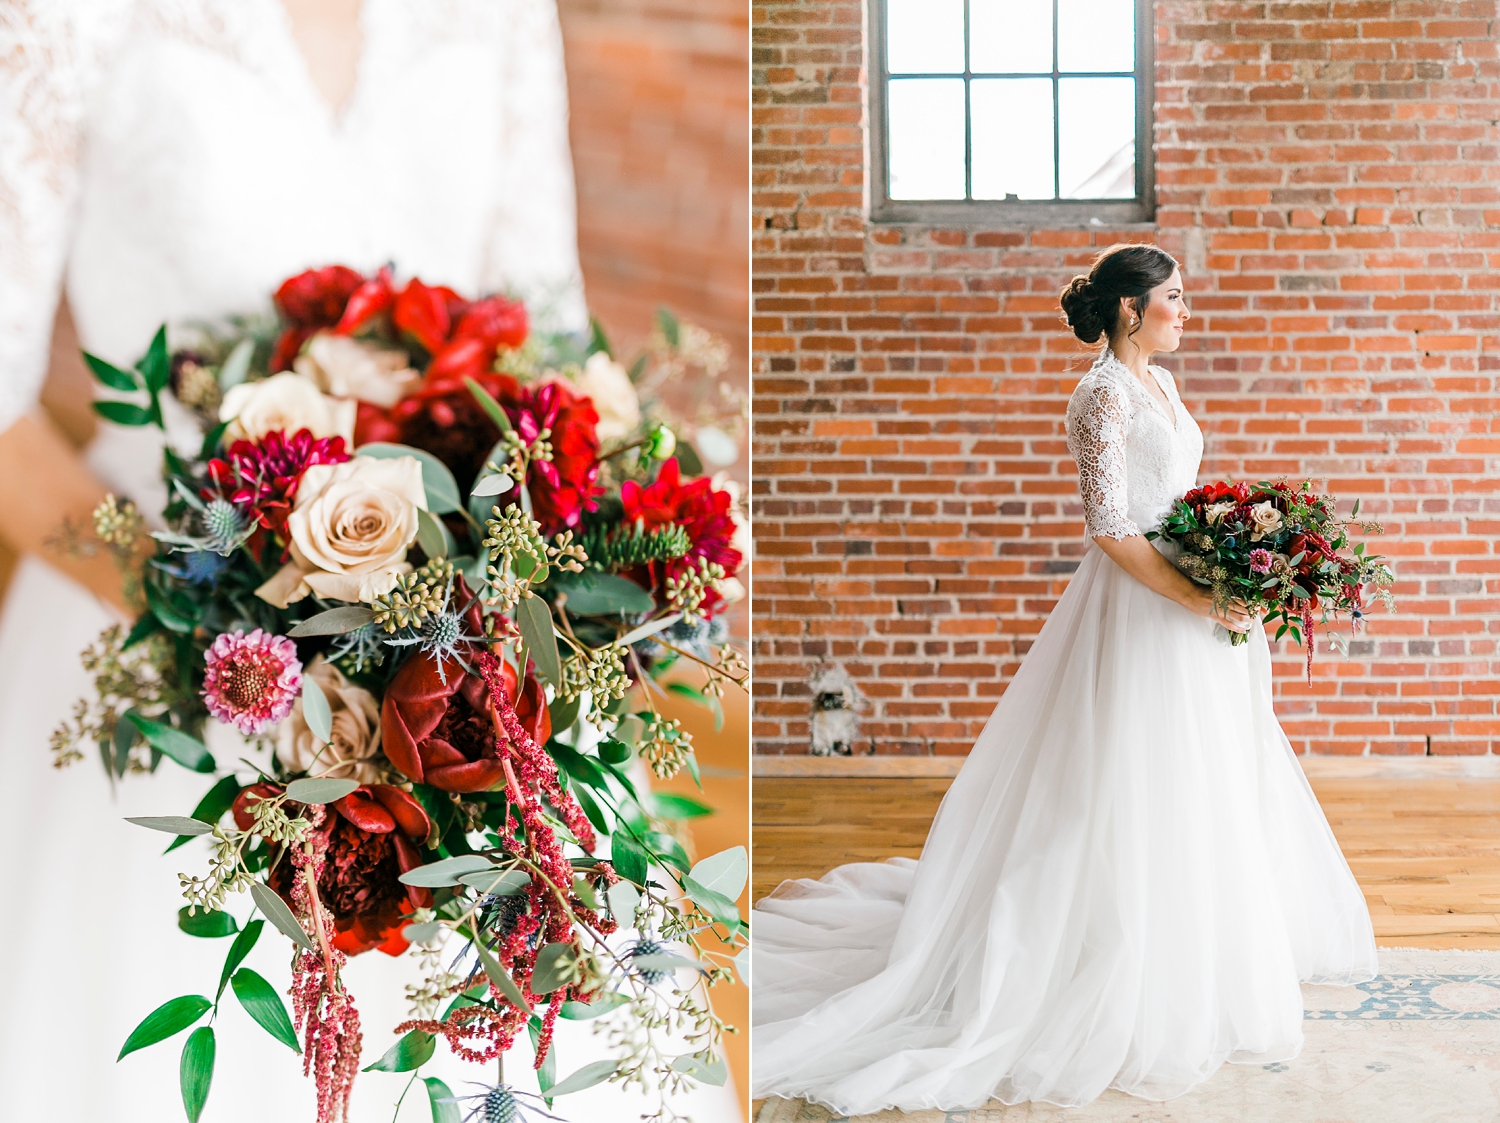 bridal portraits with ballgown and flowers by Melissa timm